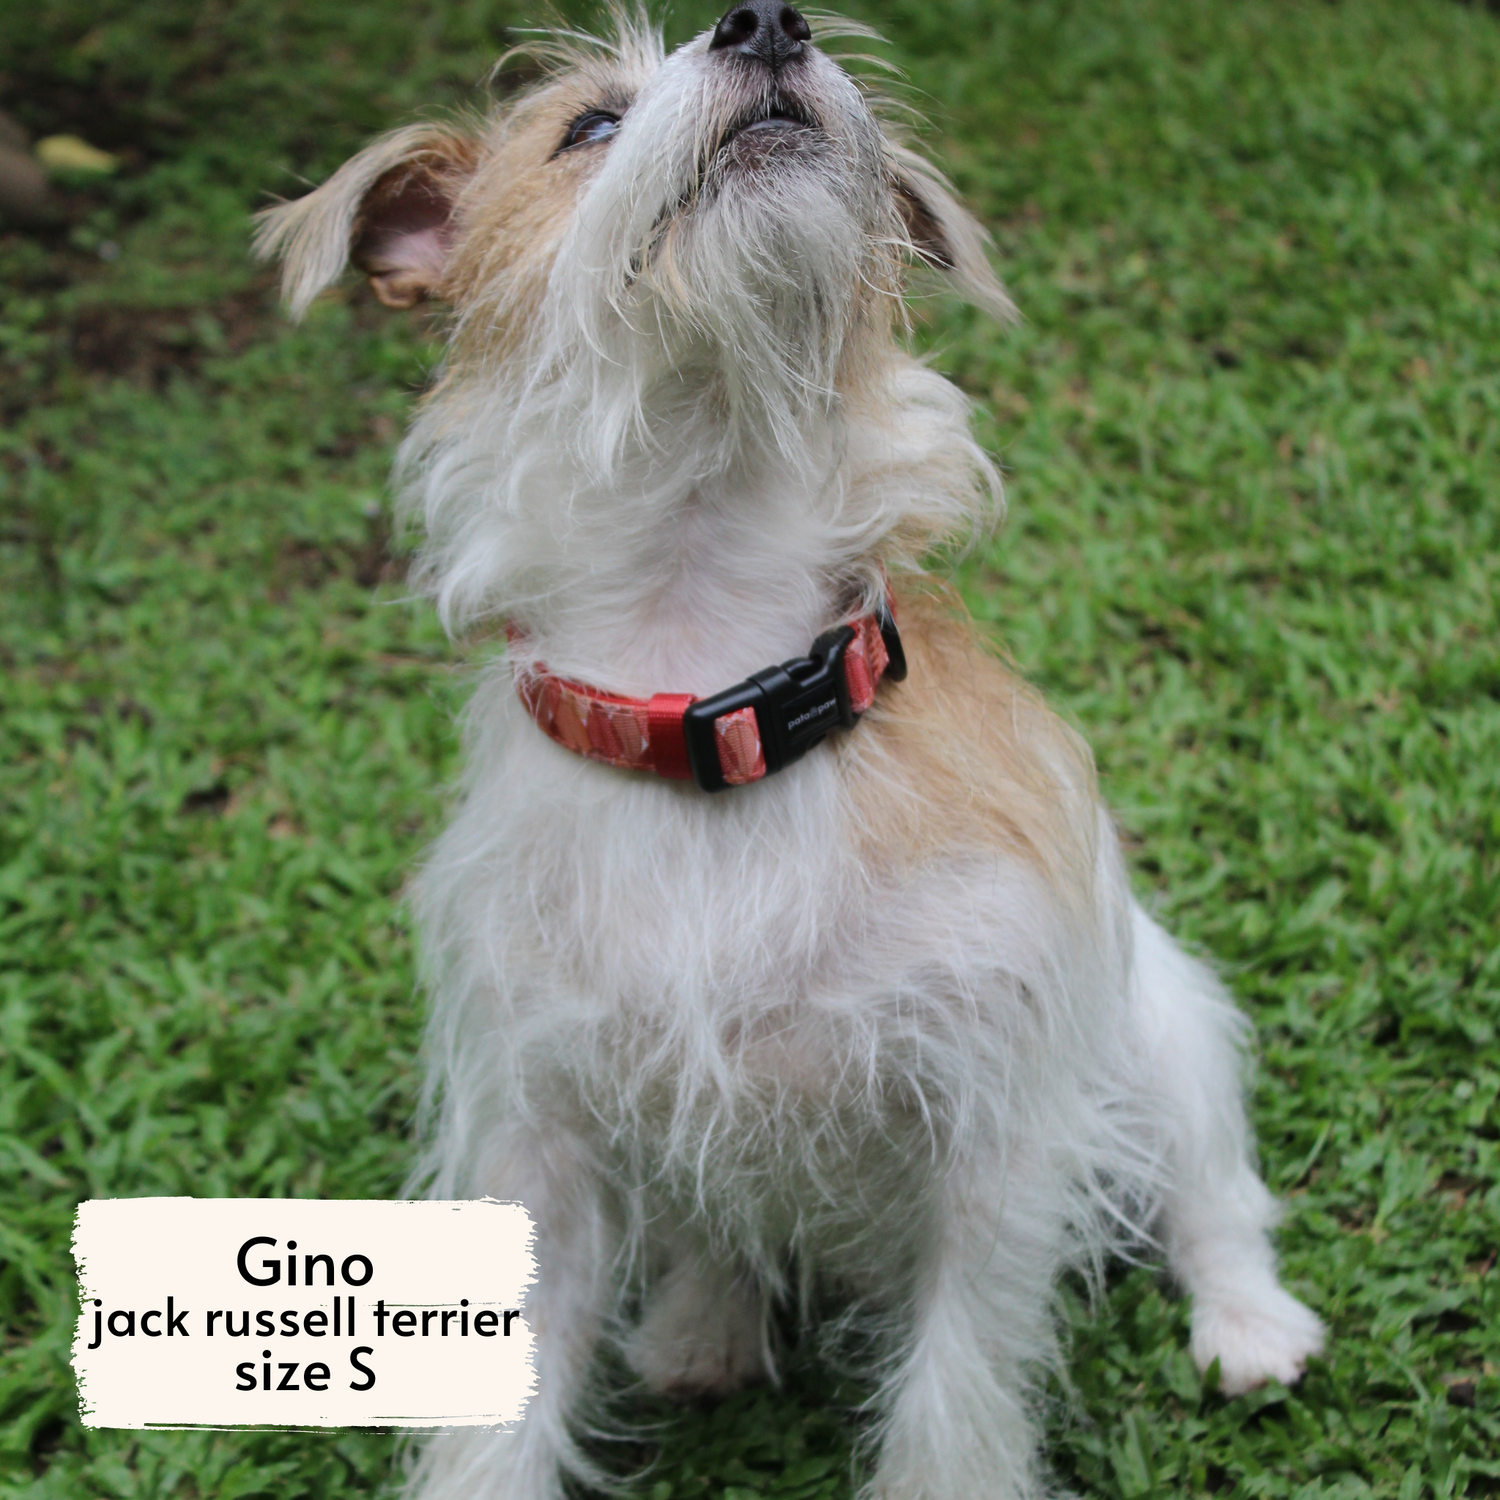 Pata Paw autumn crunch collar as seen on a small-sized dog, Gino, a Jack Russell Terrier